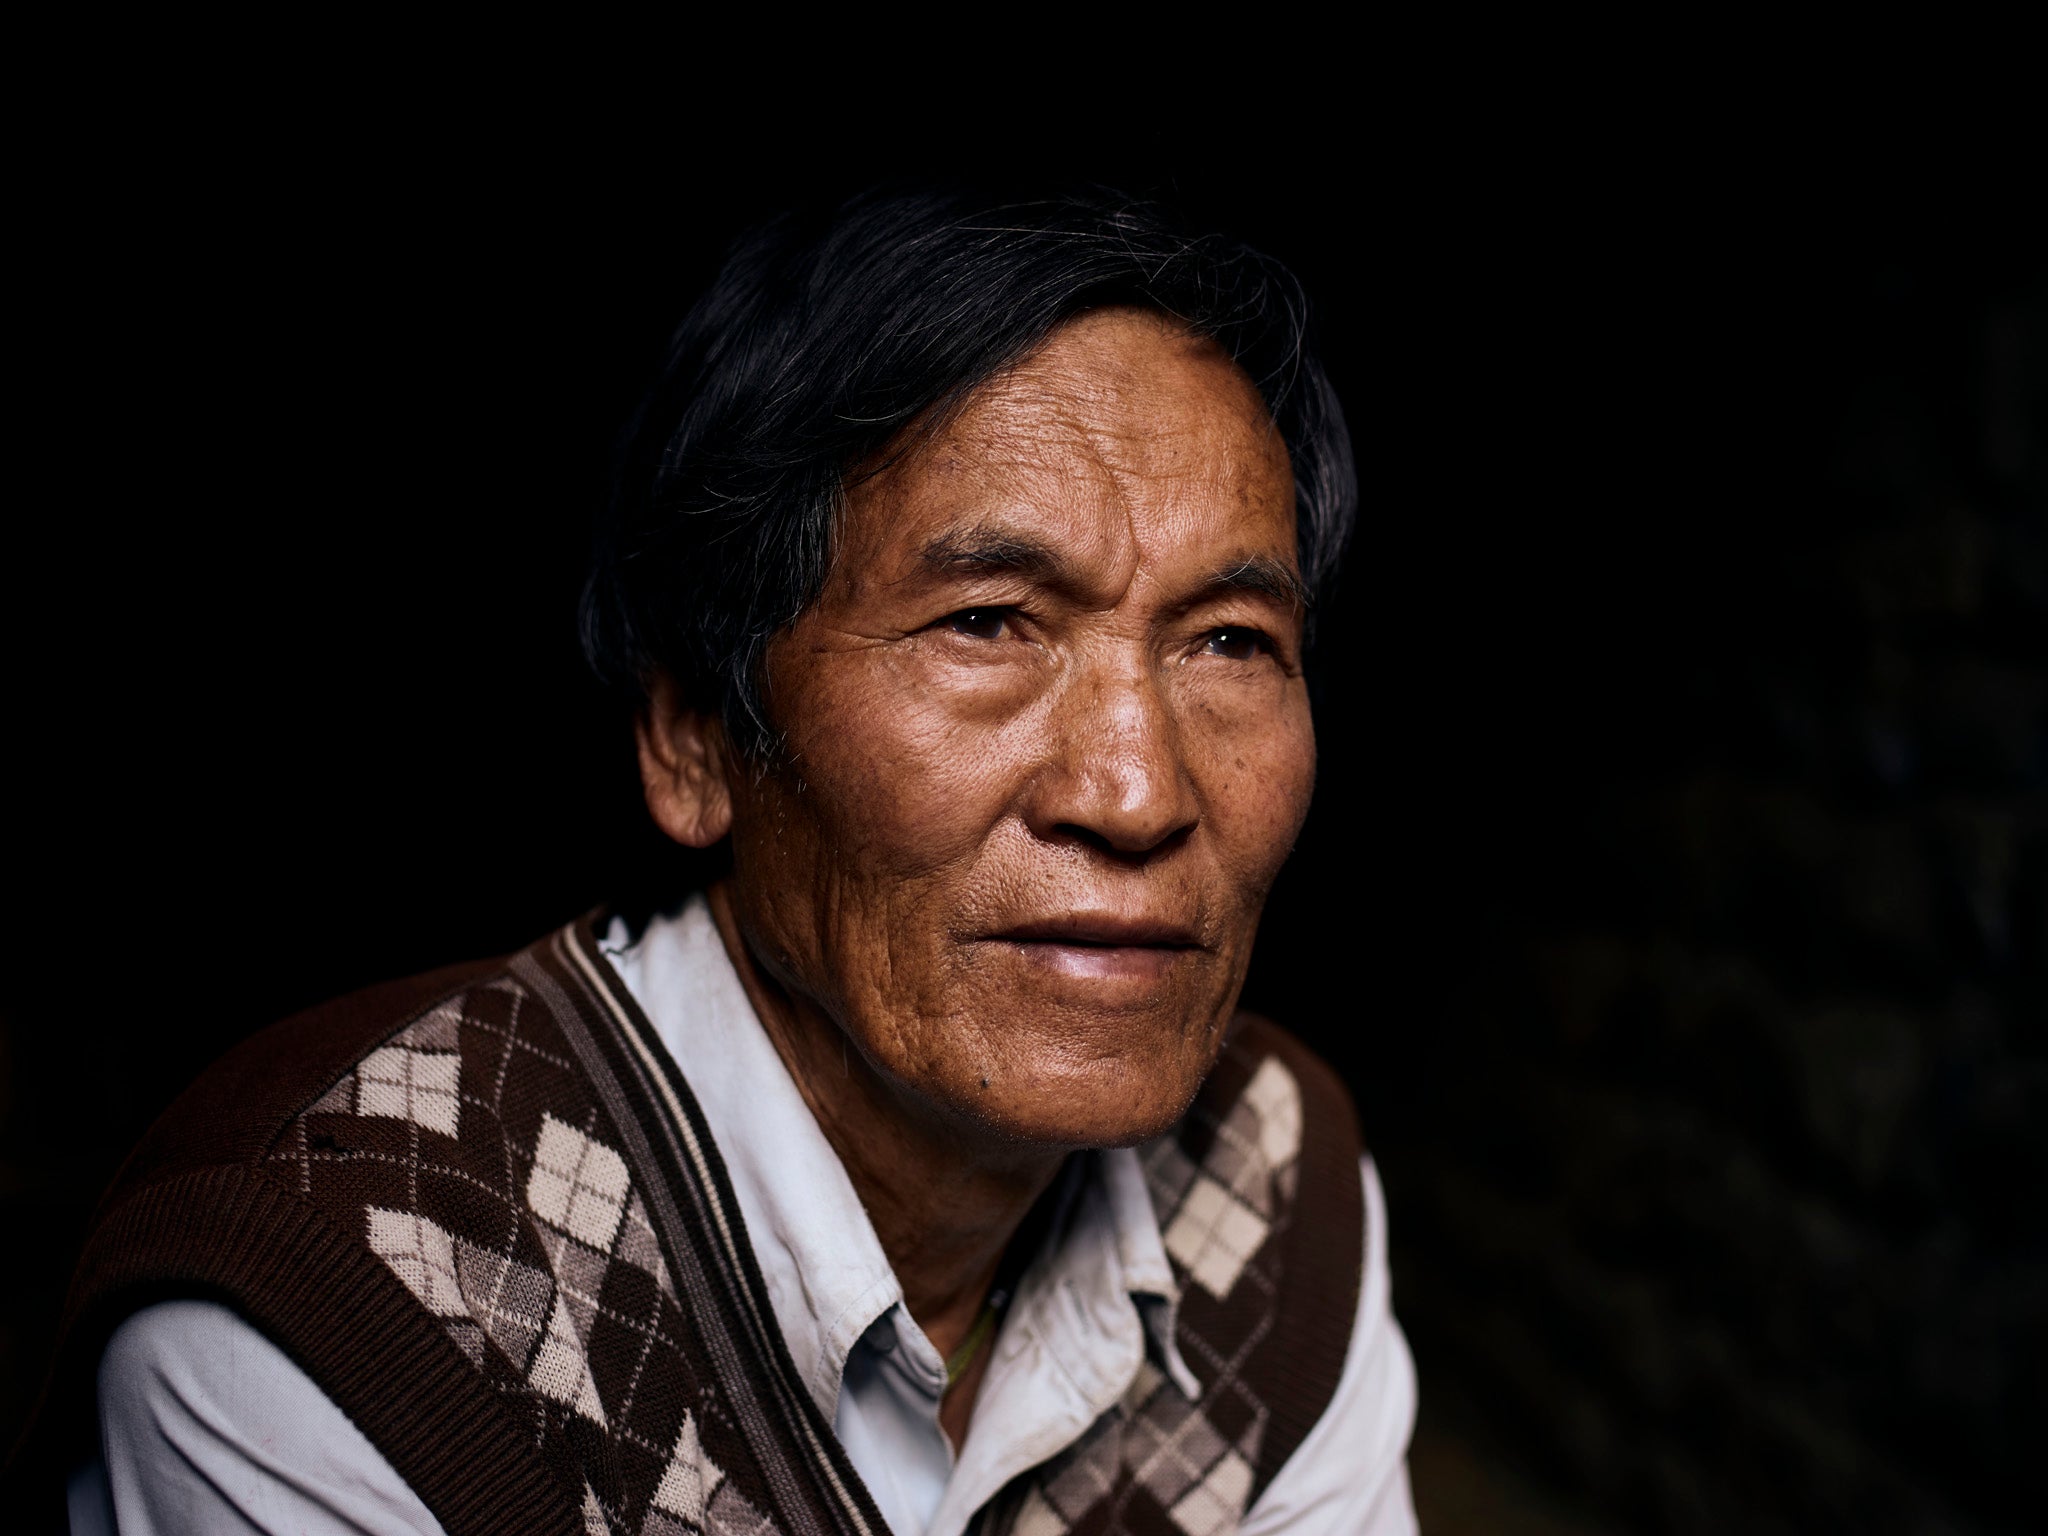 Aange Gurung, 77, says: ‘We do not understand the terminology “climate change”. Here we observe changes over time. We read the land and the sky’